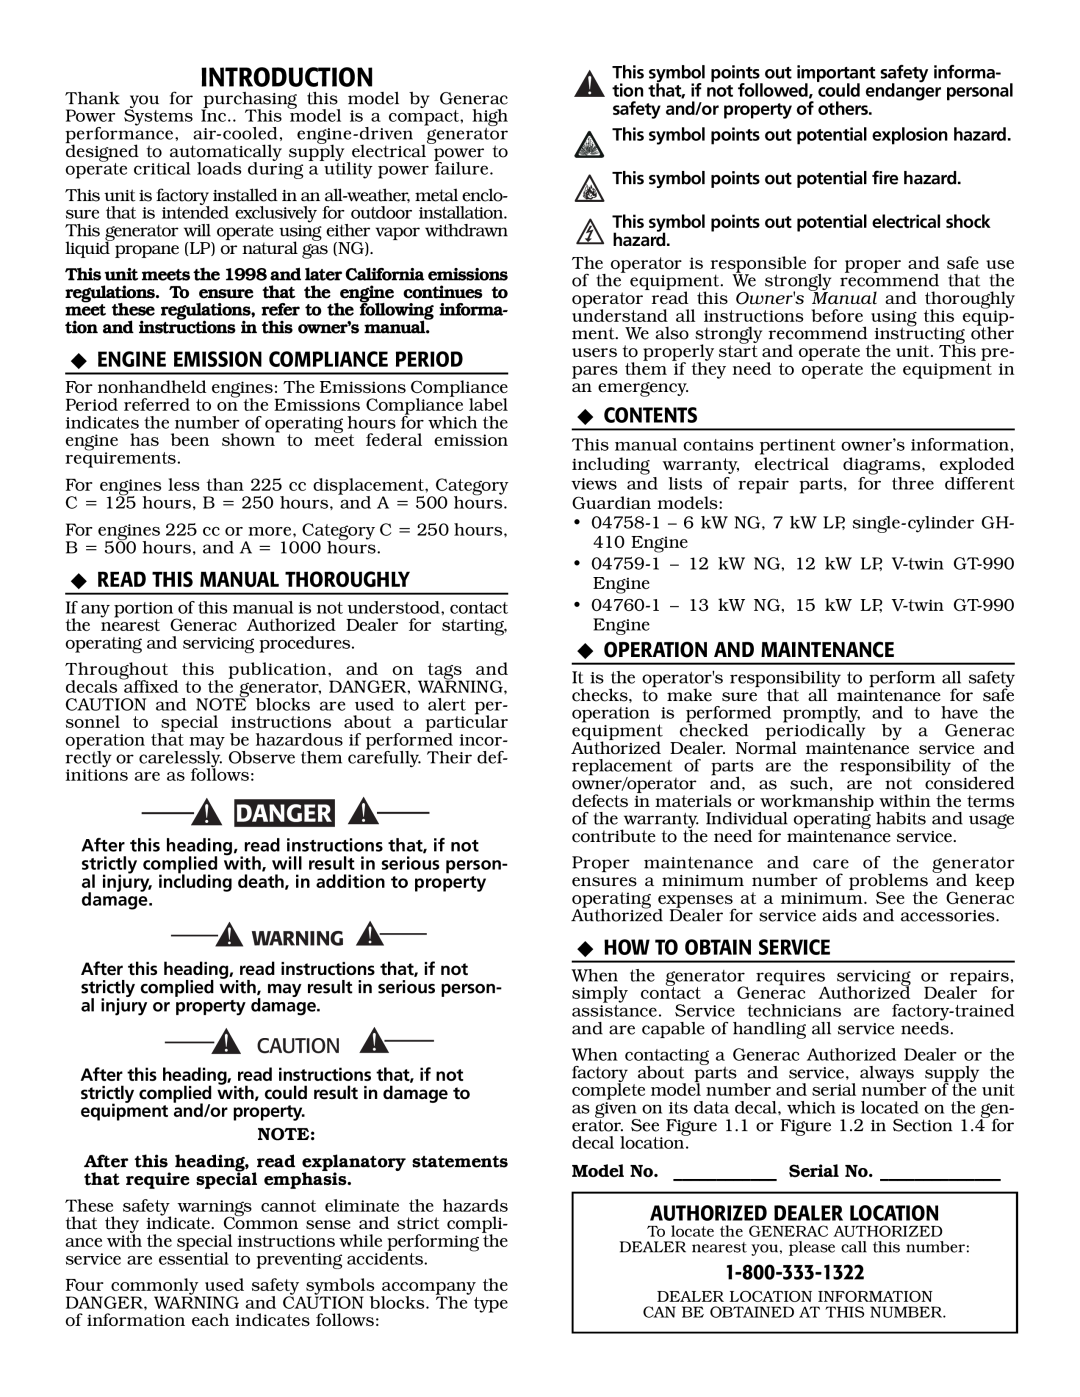 Generac Power Systems 04758-1, 04759-1, 04760-1 Introduction, Danger, ‹ Engine Emission Compliance Period, ‹ Contents 